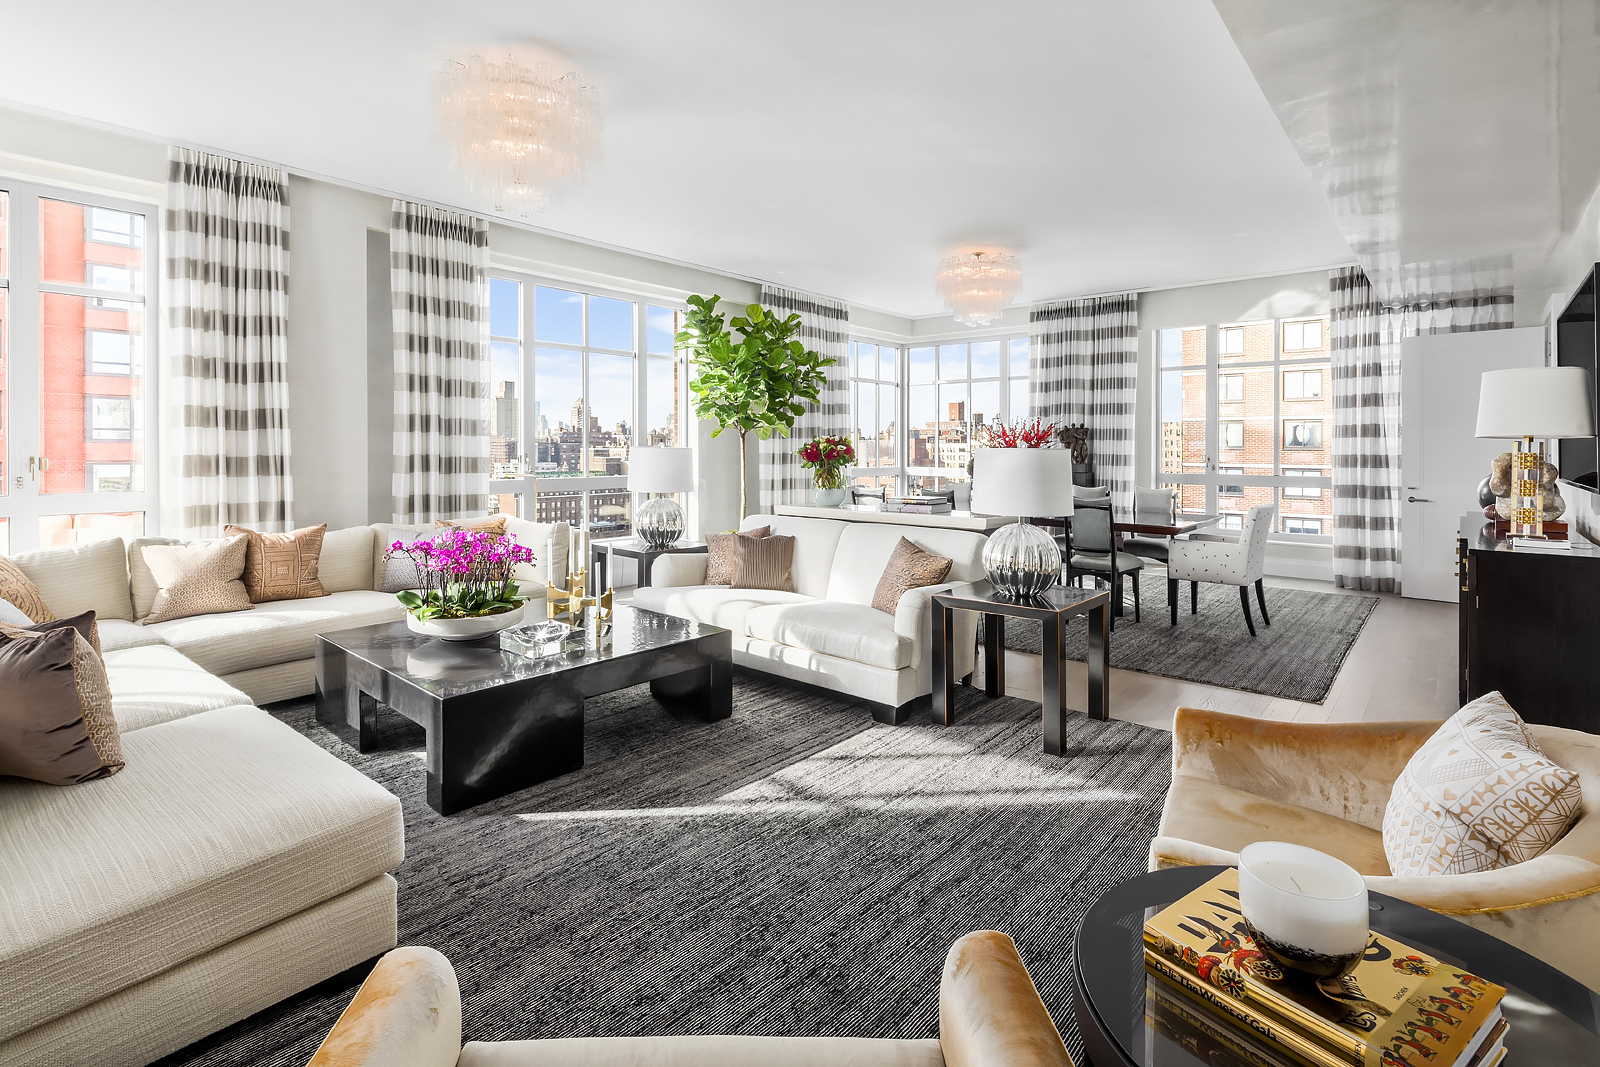 200 East 95th Street 15A, Yorkville, Upper East Side, NYC - 5 Bedrooms  
4.5 Bathrooms  
8 Rooms - 